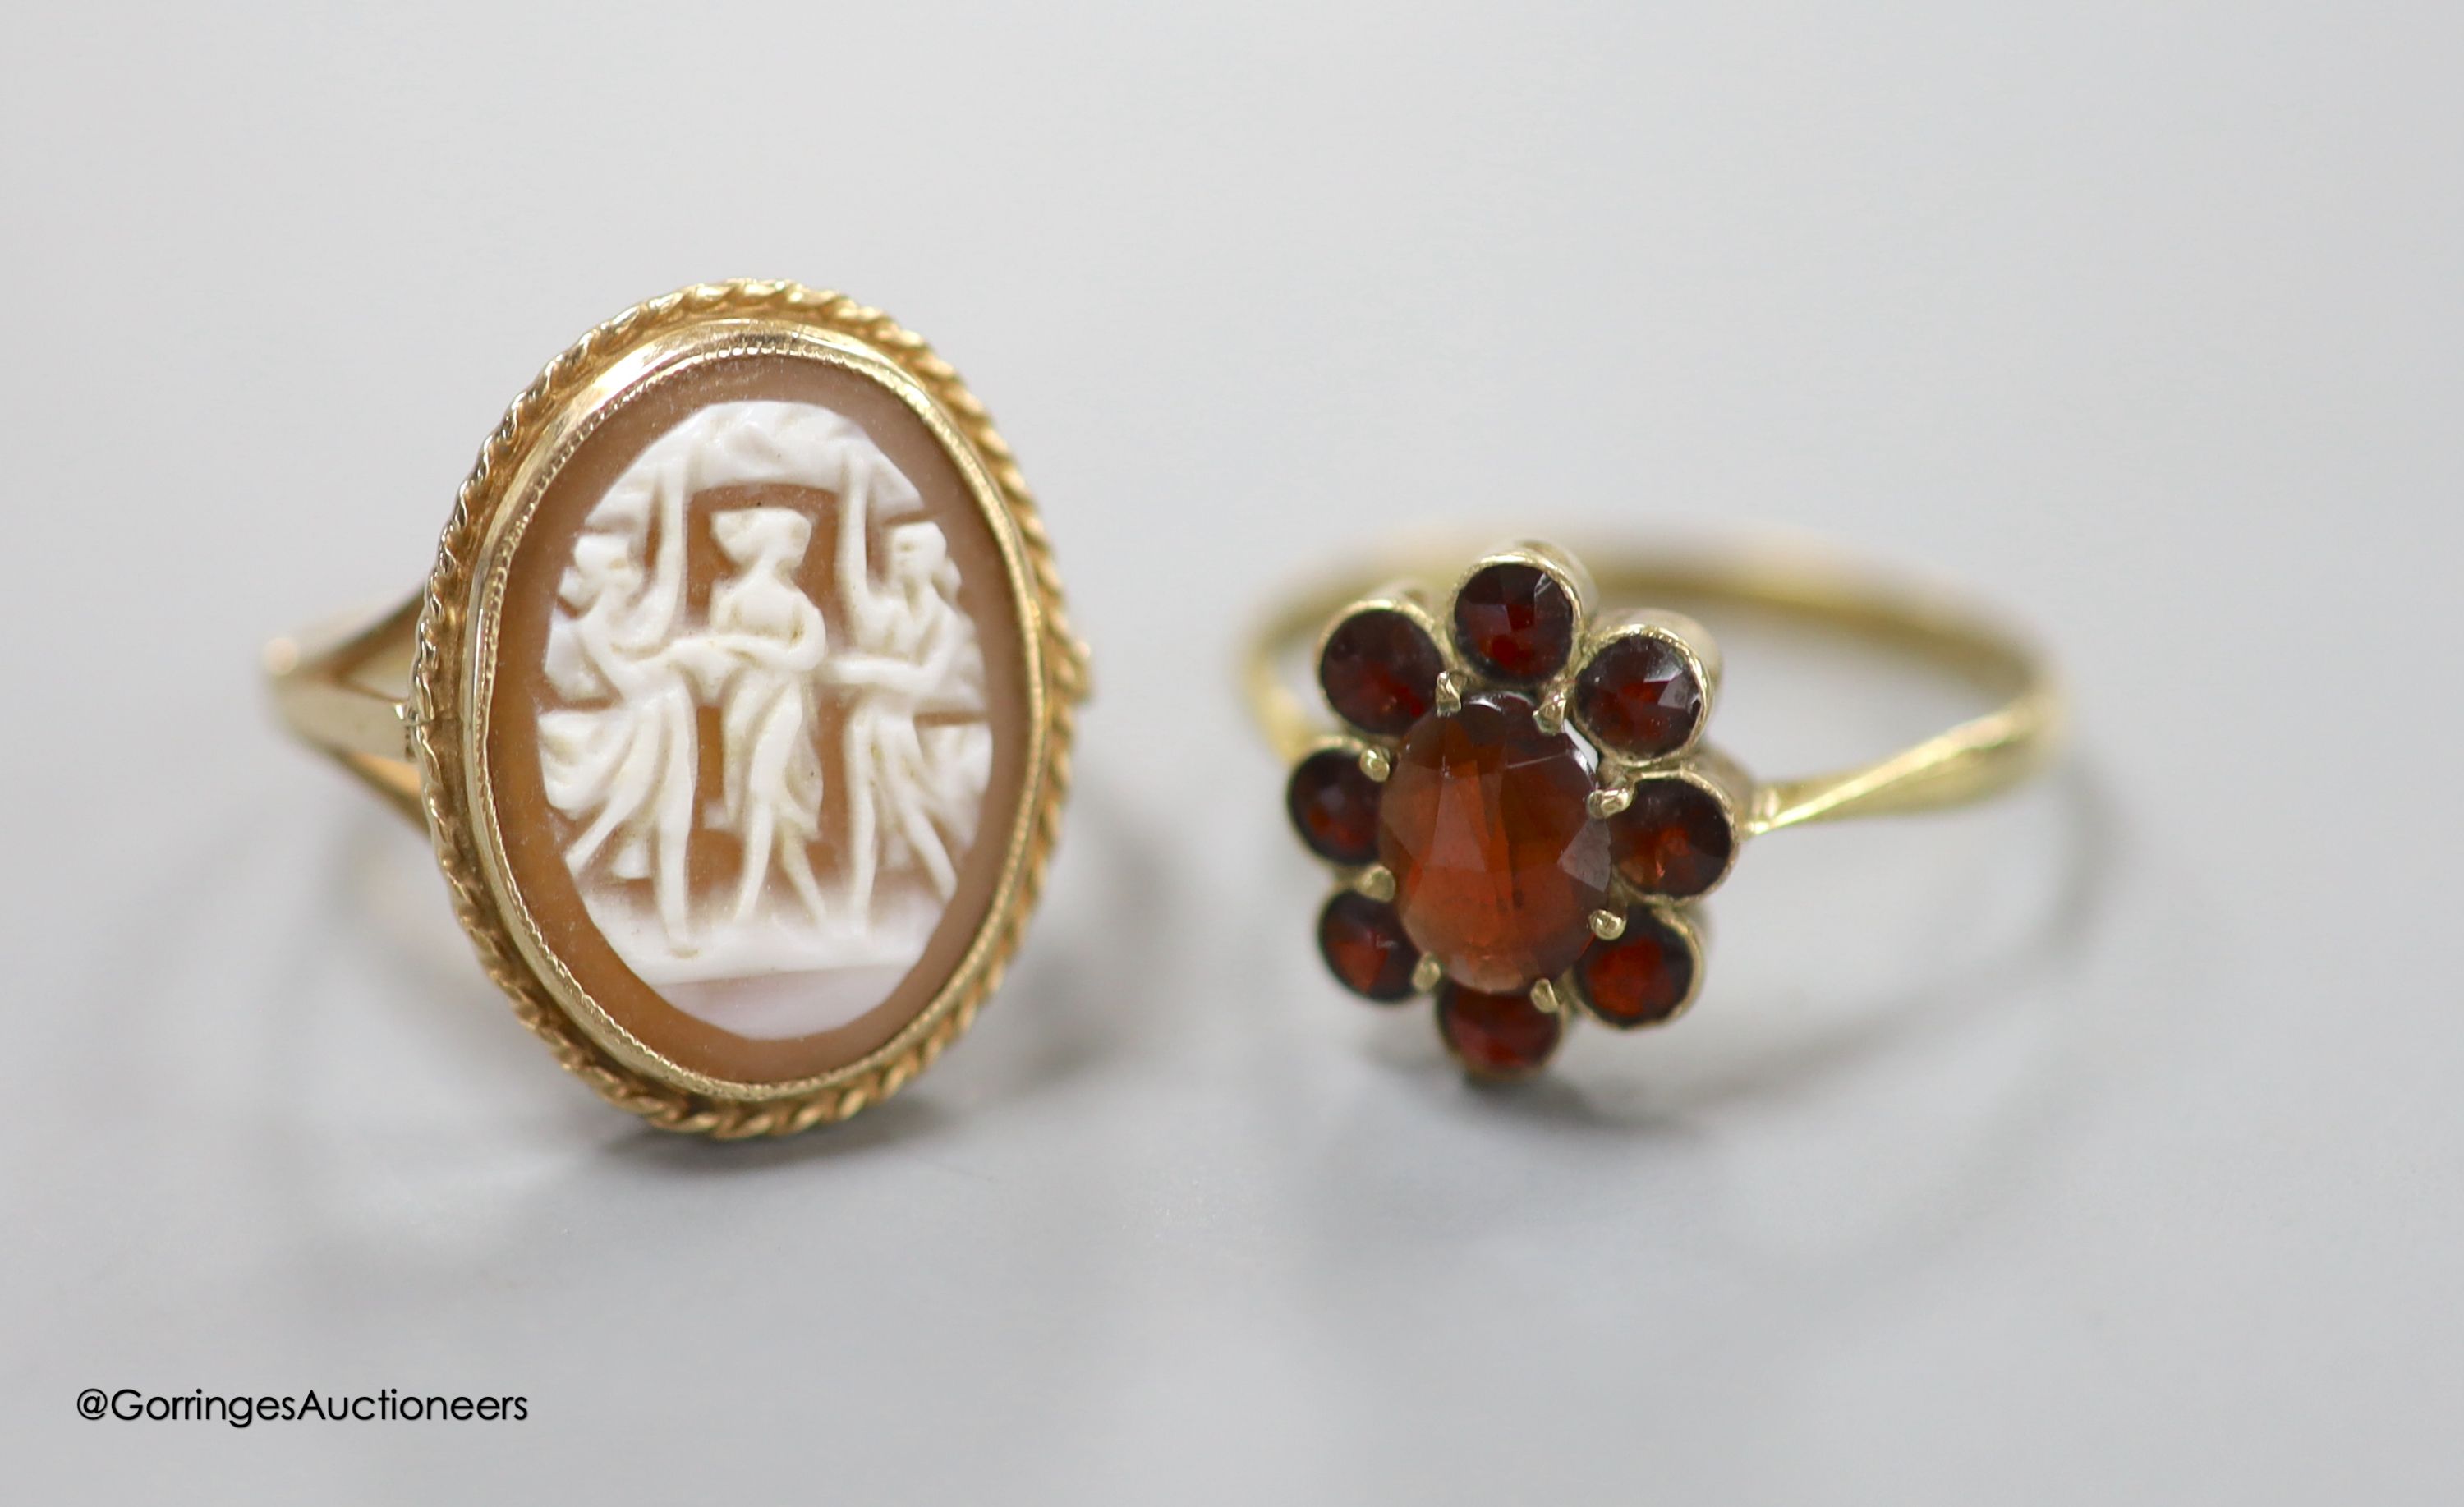 A modern 9ct gold and 'Three Graces' oval cameo shell ring, size K, gross 3.2 grams and a 333 (8kt) yellow metal and garnet cluster ring, size O/P, gross 1.7 grams.